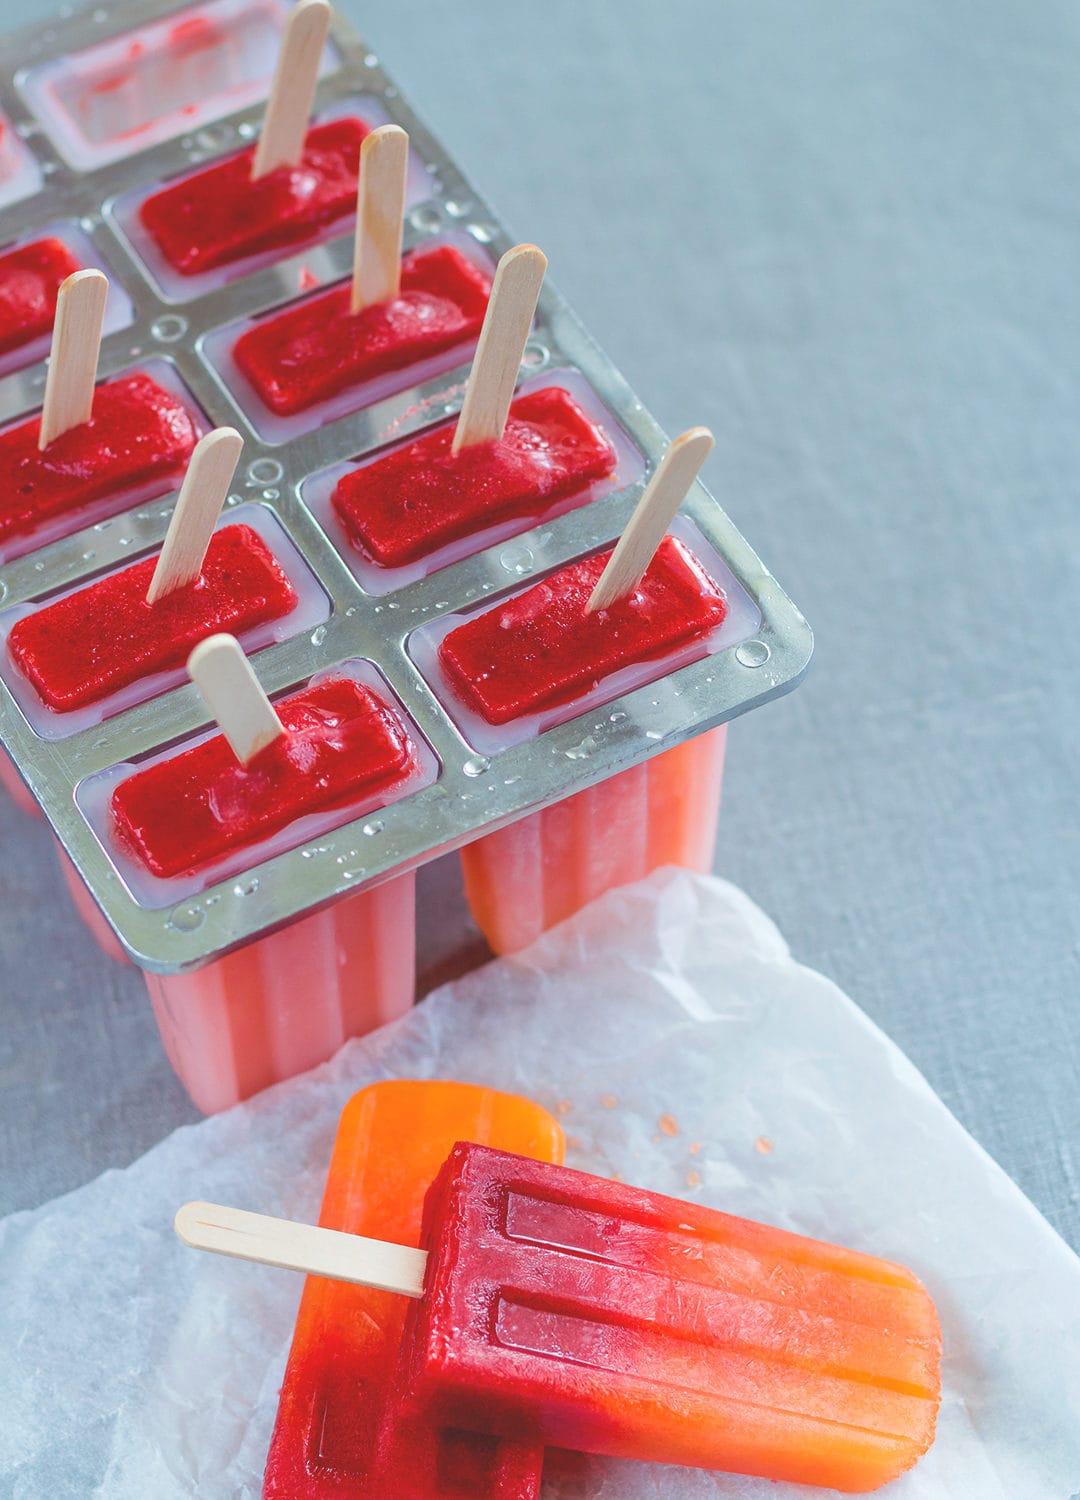 Orange Strawberry Sunrise Popsicles - treat yourself with homemade popsicles this summer. We LOVE these! They're easy to make, delicious, and actually healthy! (raw vegan) | thehealthfulideas.com